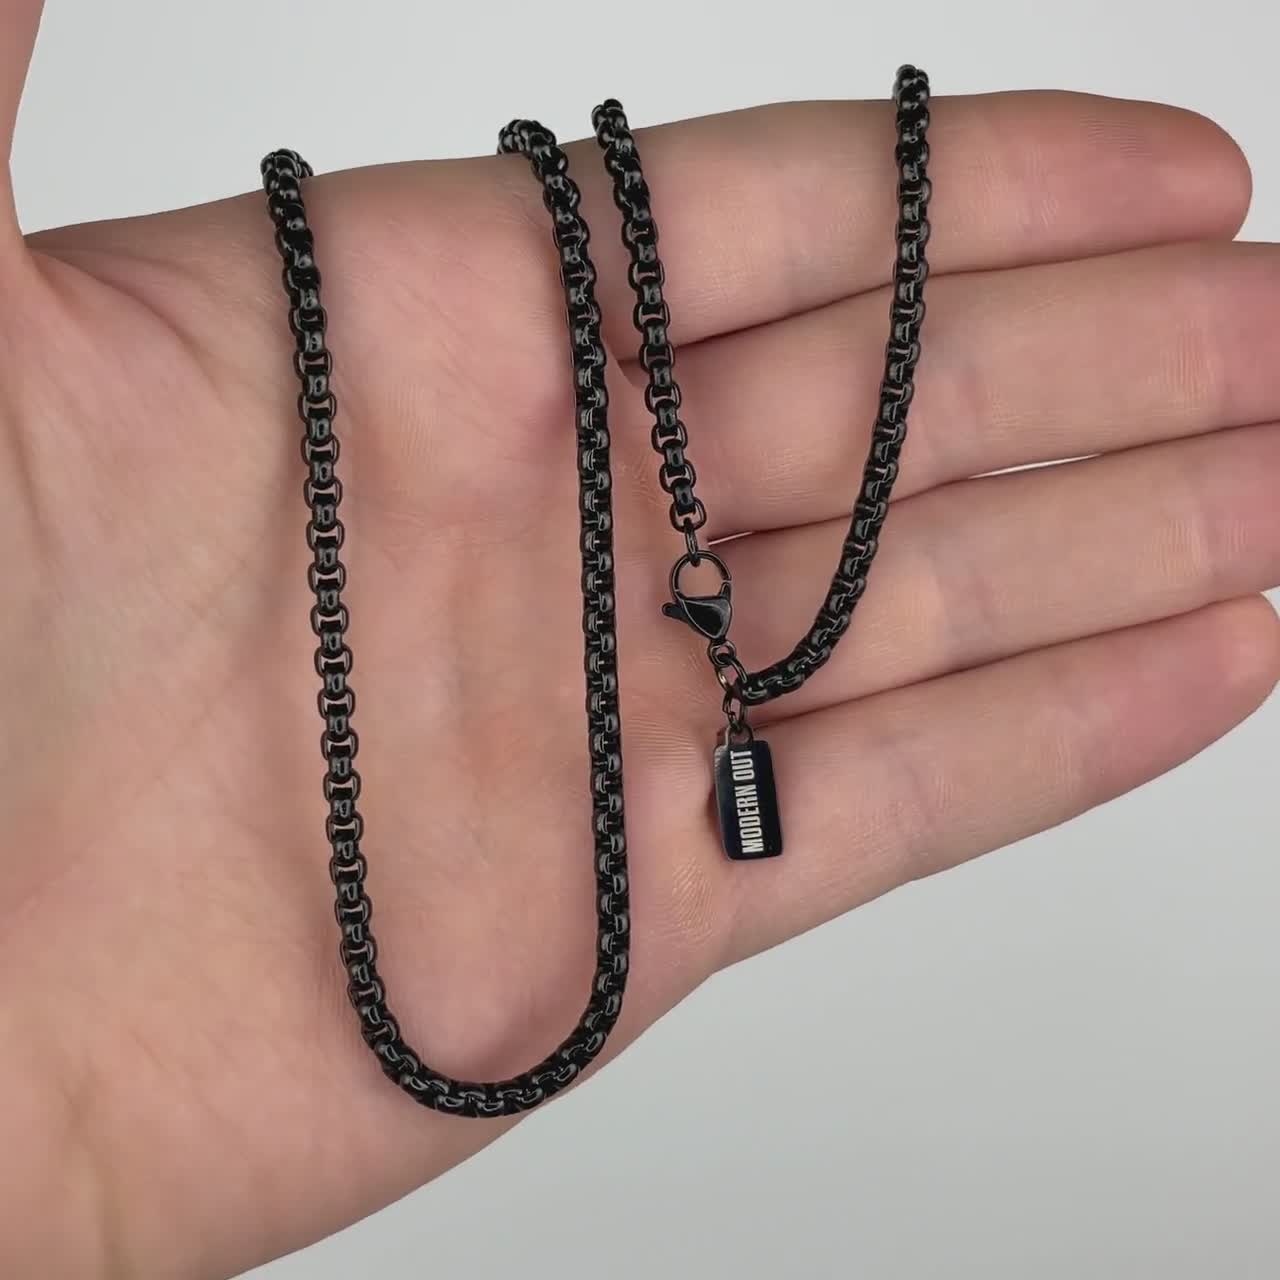 Men's Black Chain Necklace - Thick Box Chain Necklace 3.5mm - Waterproof  Chain - Stainless Steel Chain - Black Jewelry by Modern Out